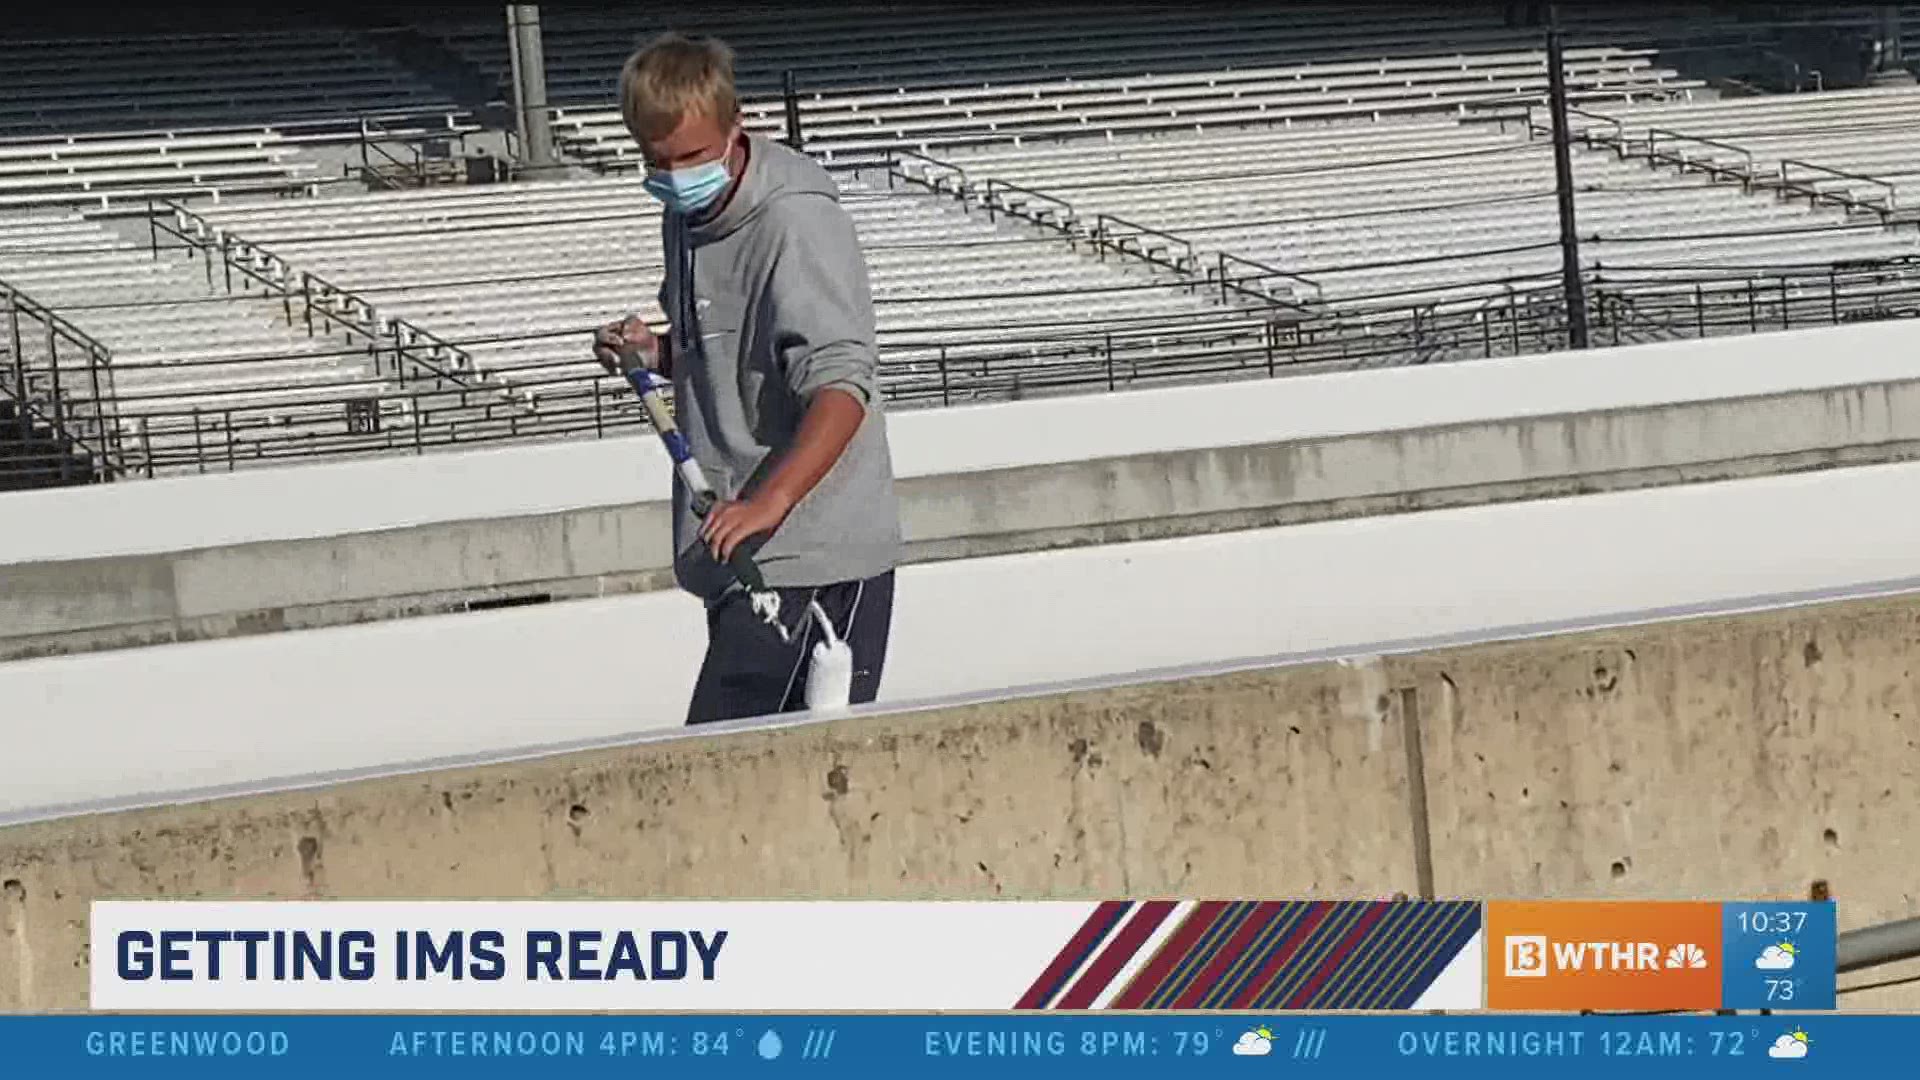 Even though the hundreds of thousands of fans won't be at the track, the IMS team still polished up the speedway.